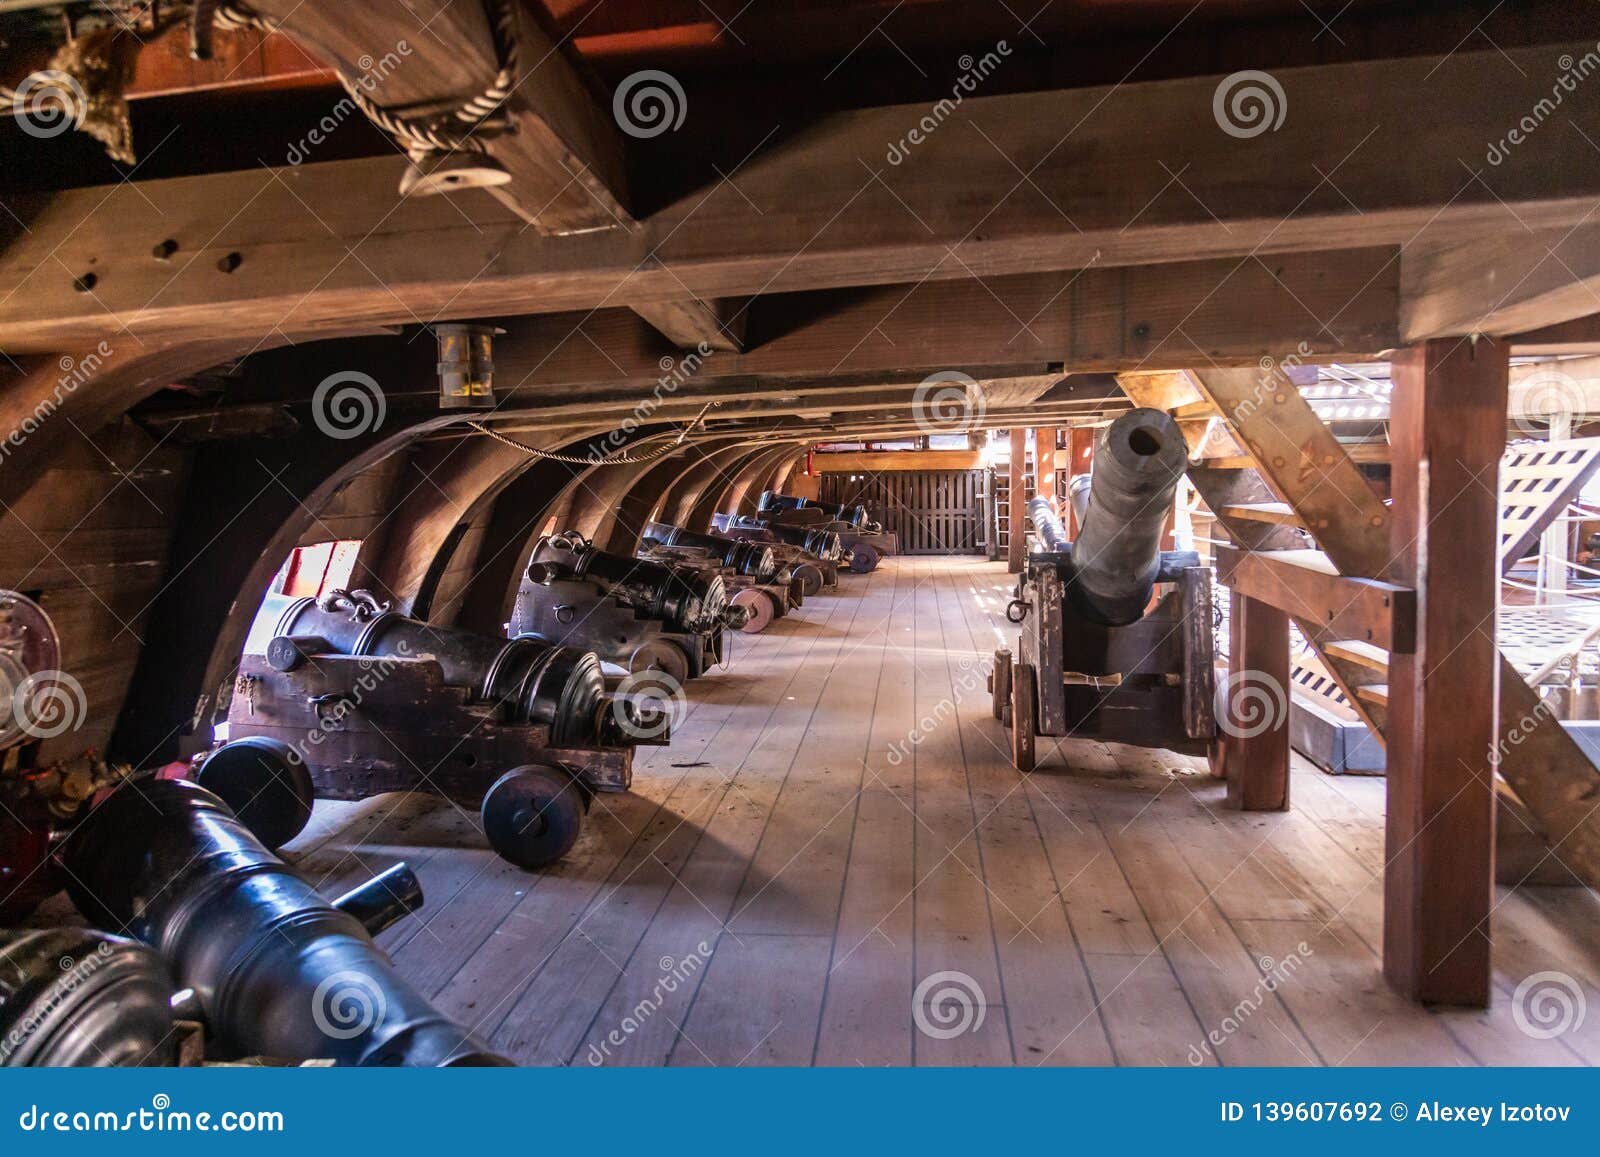 on the gun deck of an old pirate ship moored in the port